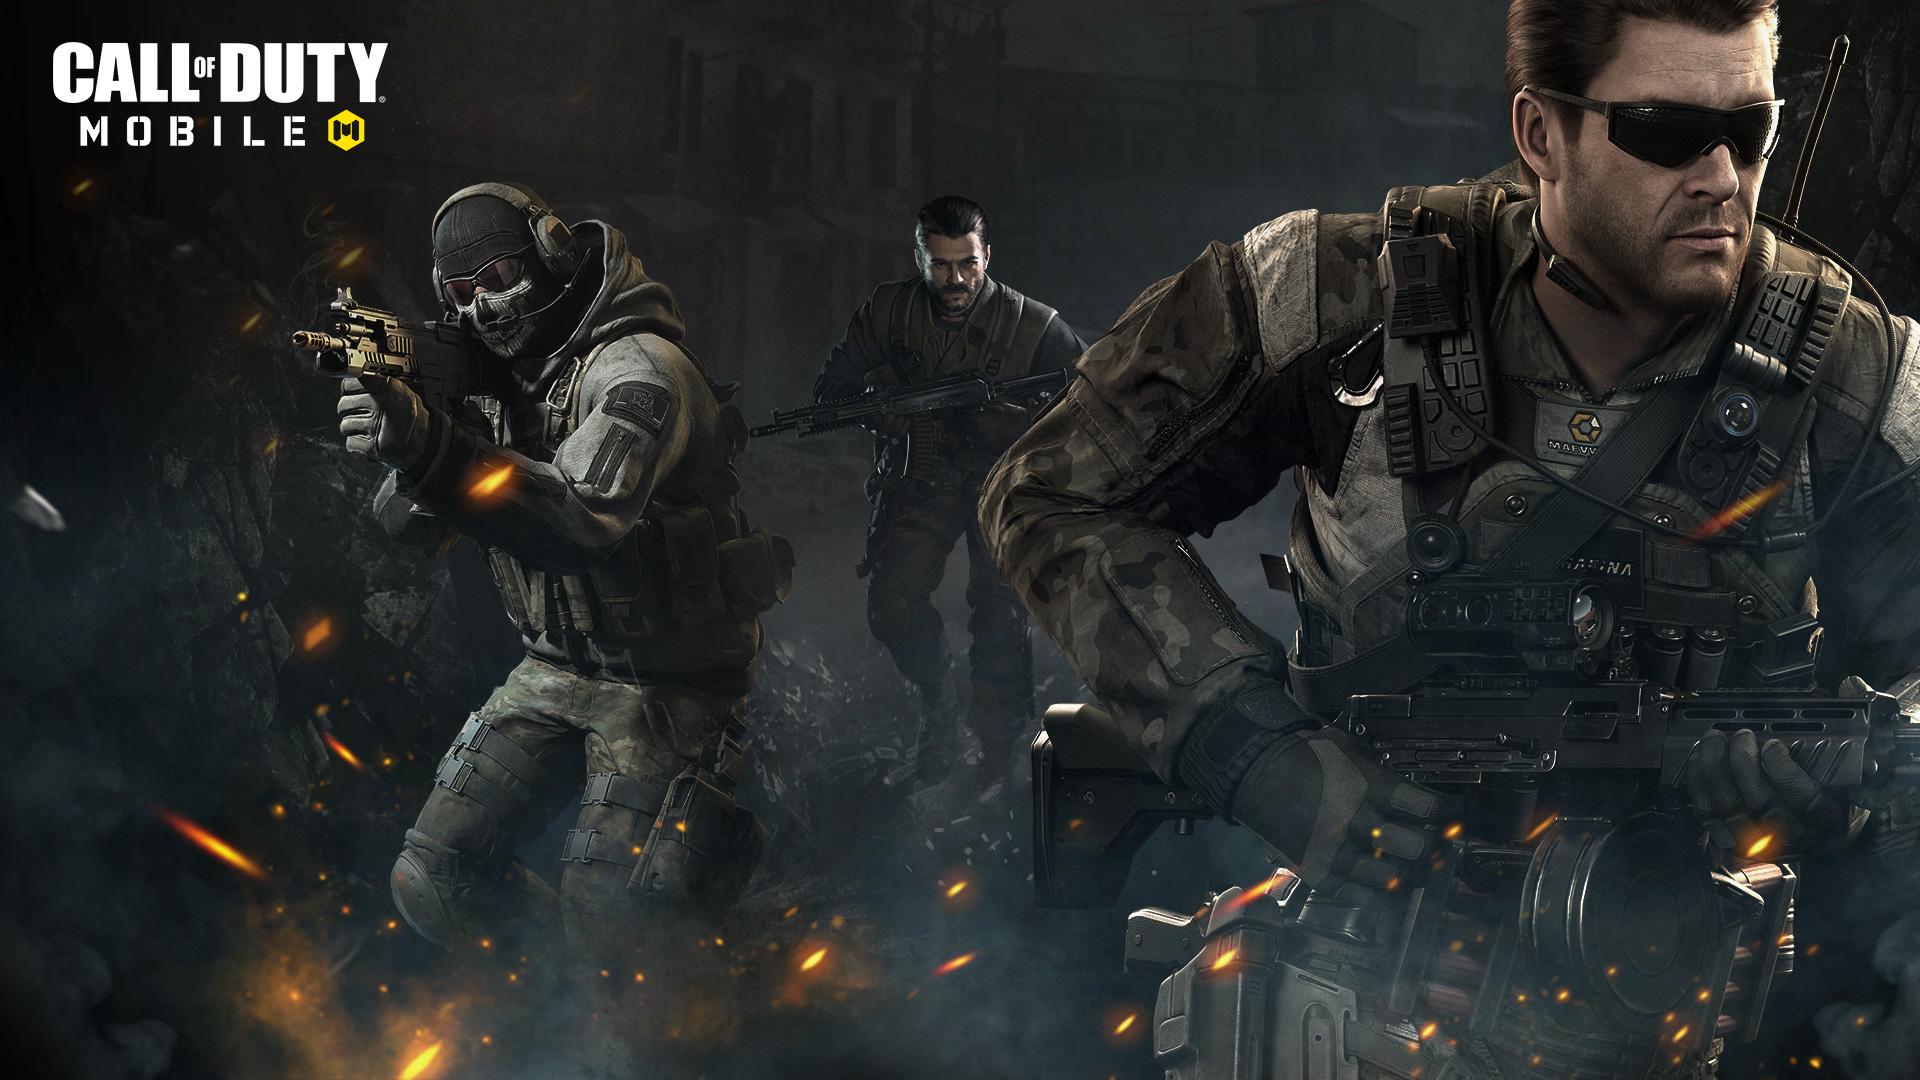 Call of Duty: Mobile will be released on Oct. 1